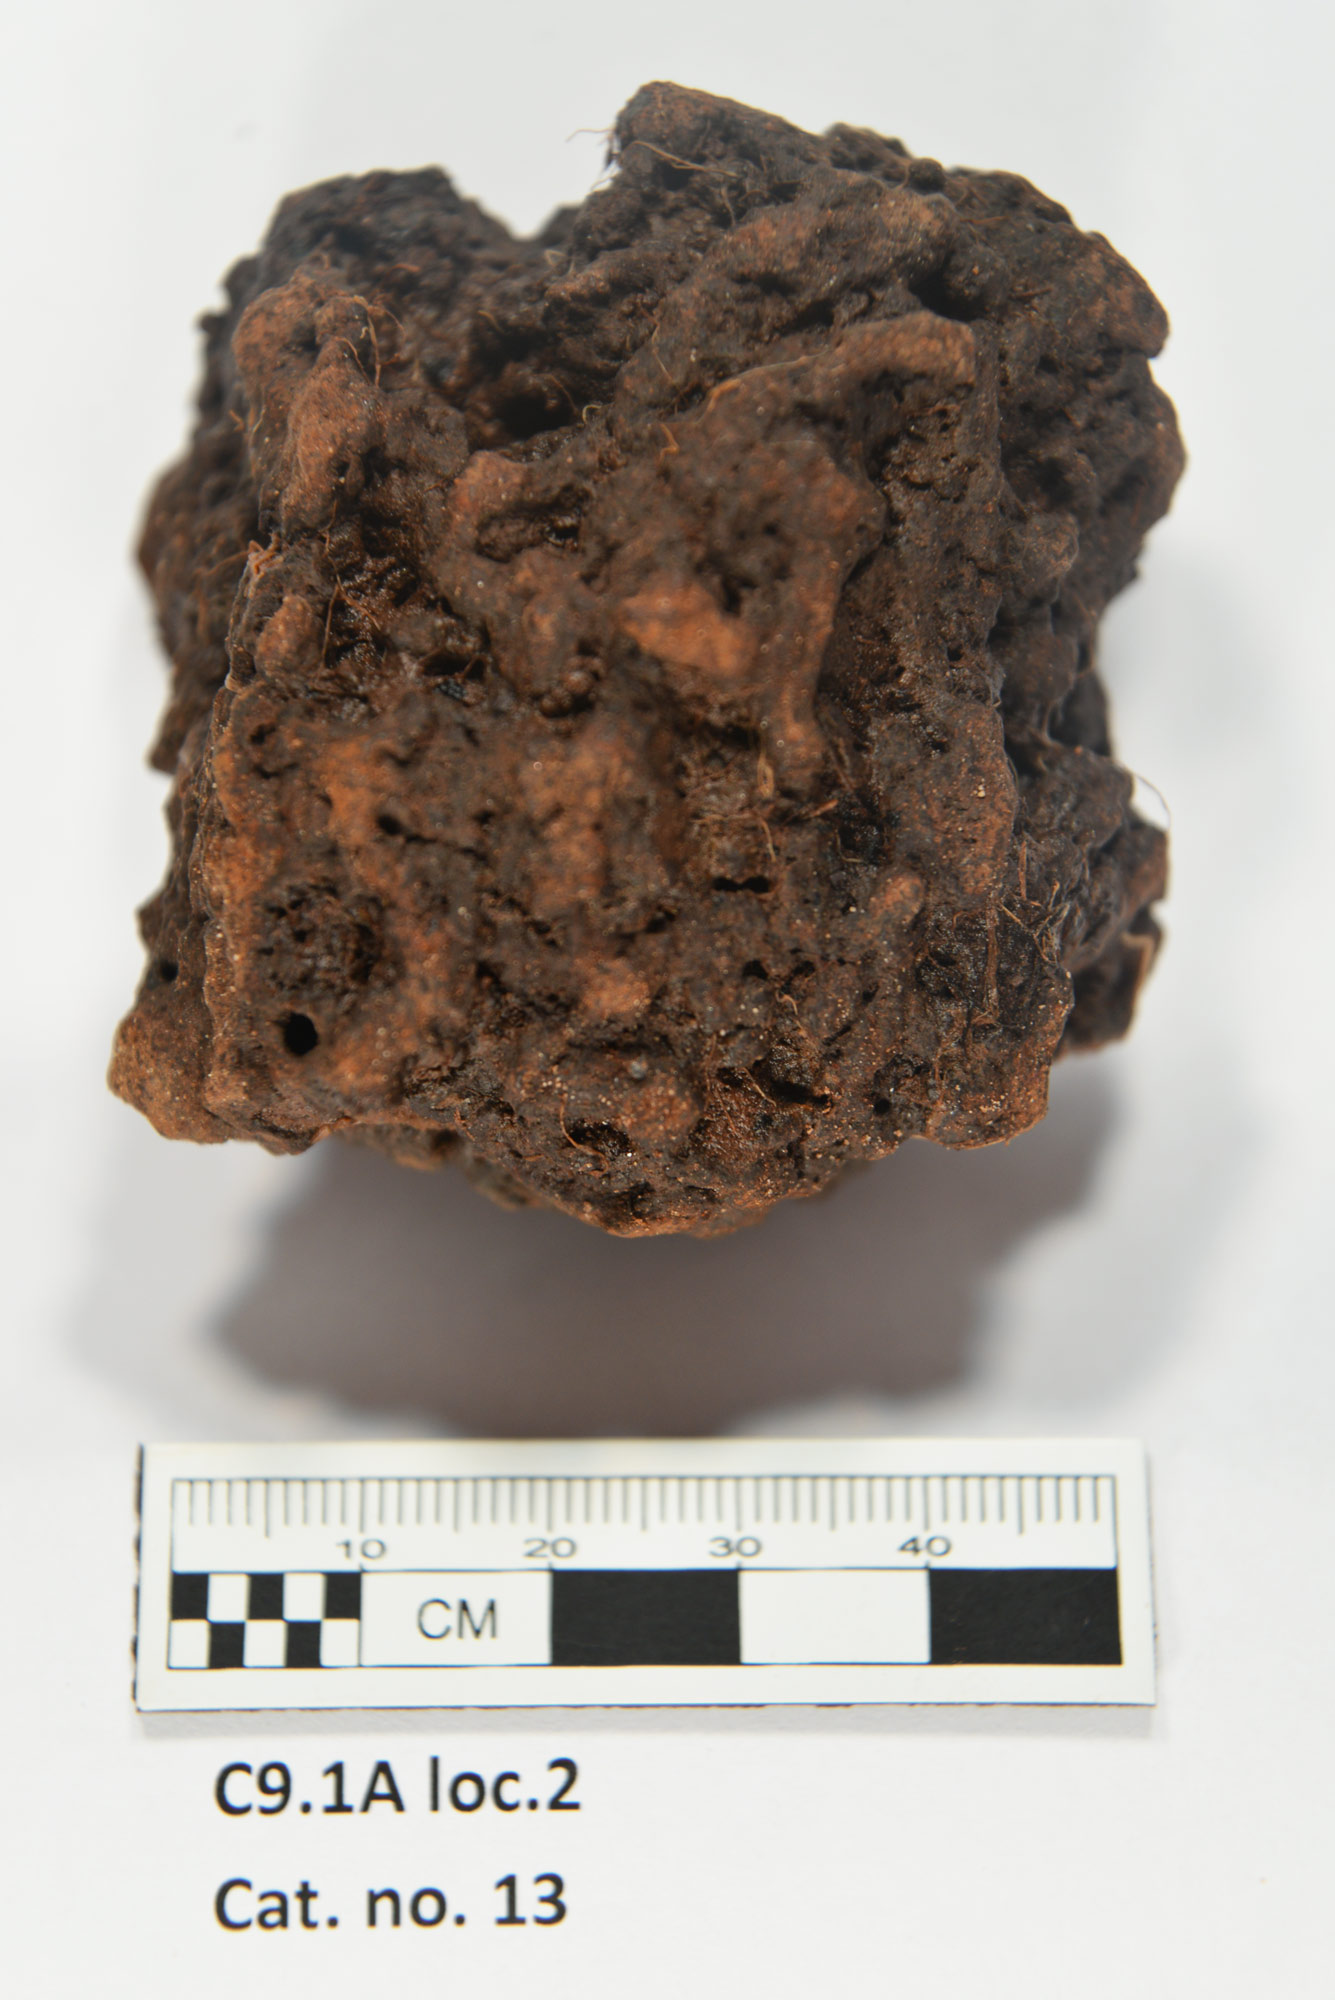 One of the larger lumps of probable roasted bog iron ore, selected samples of which were analyzed by Dr. Thomas Birch and Dr. John Still. Photo: Greg Mumford